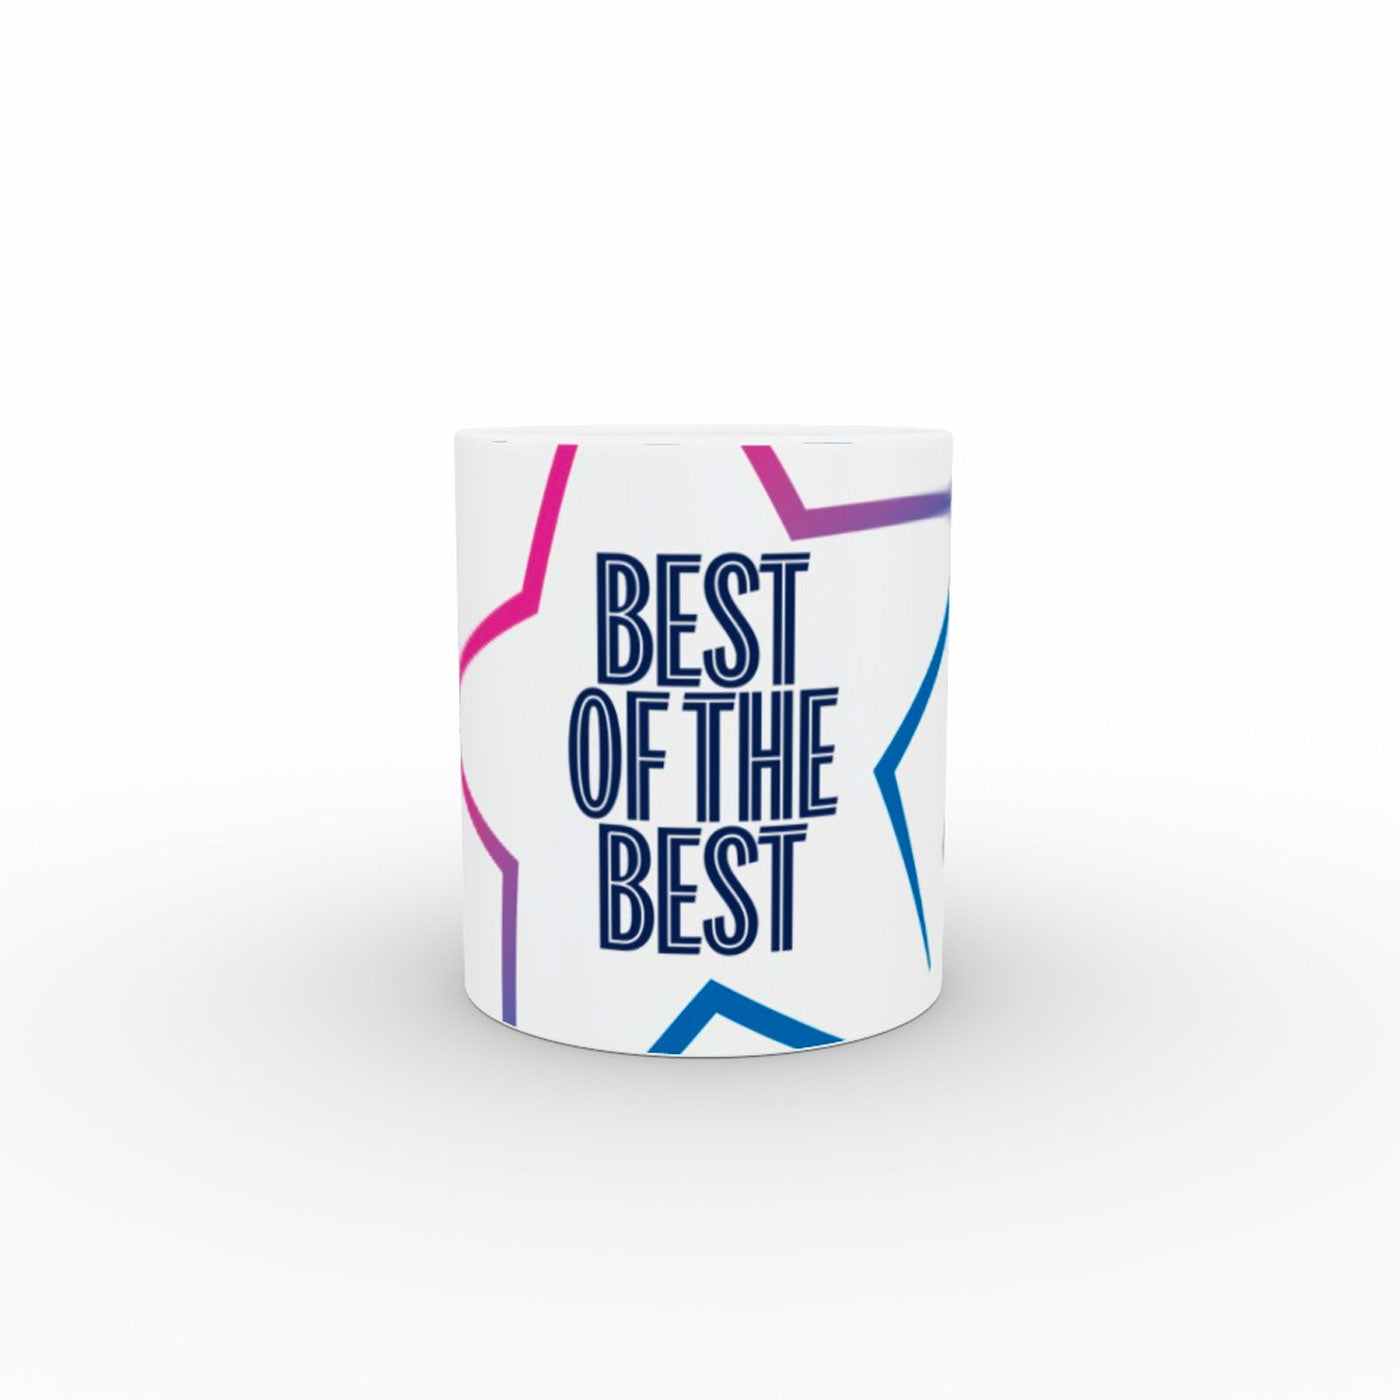 Champions League Best of The Best Starball Mug